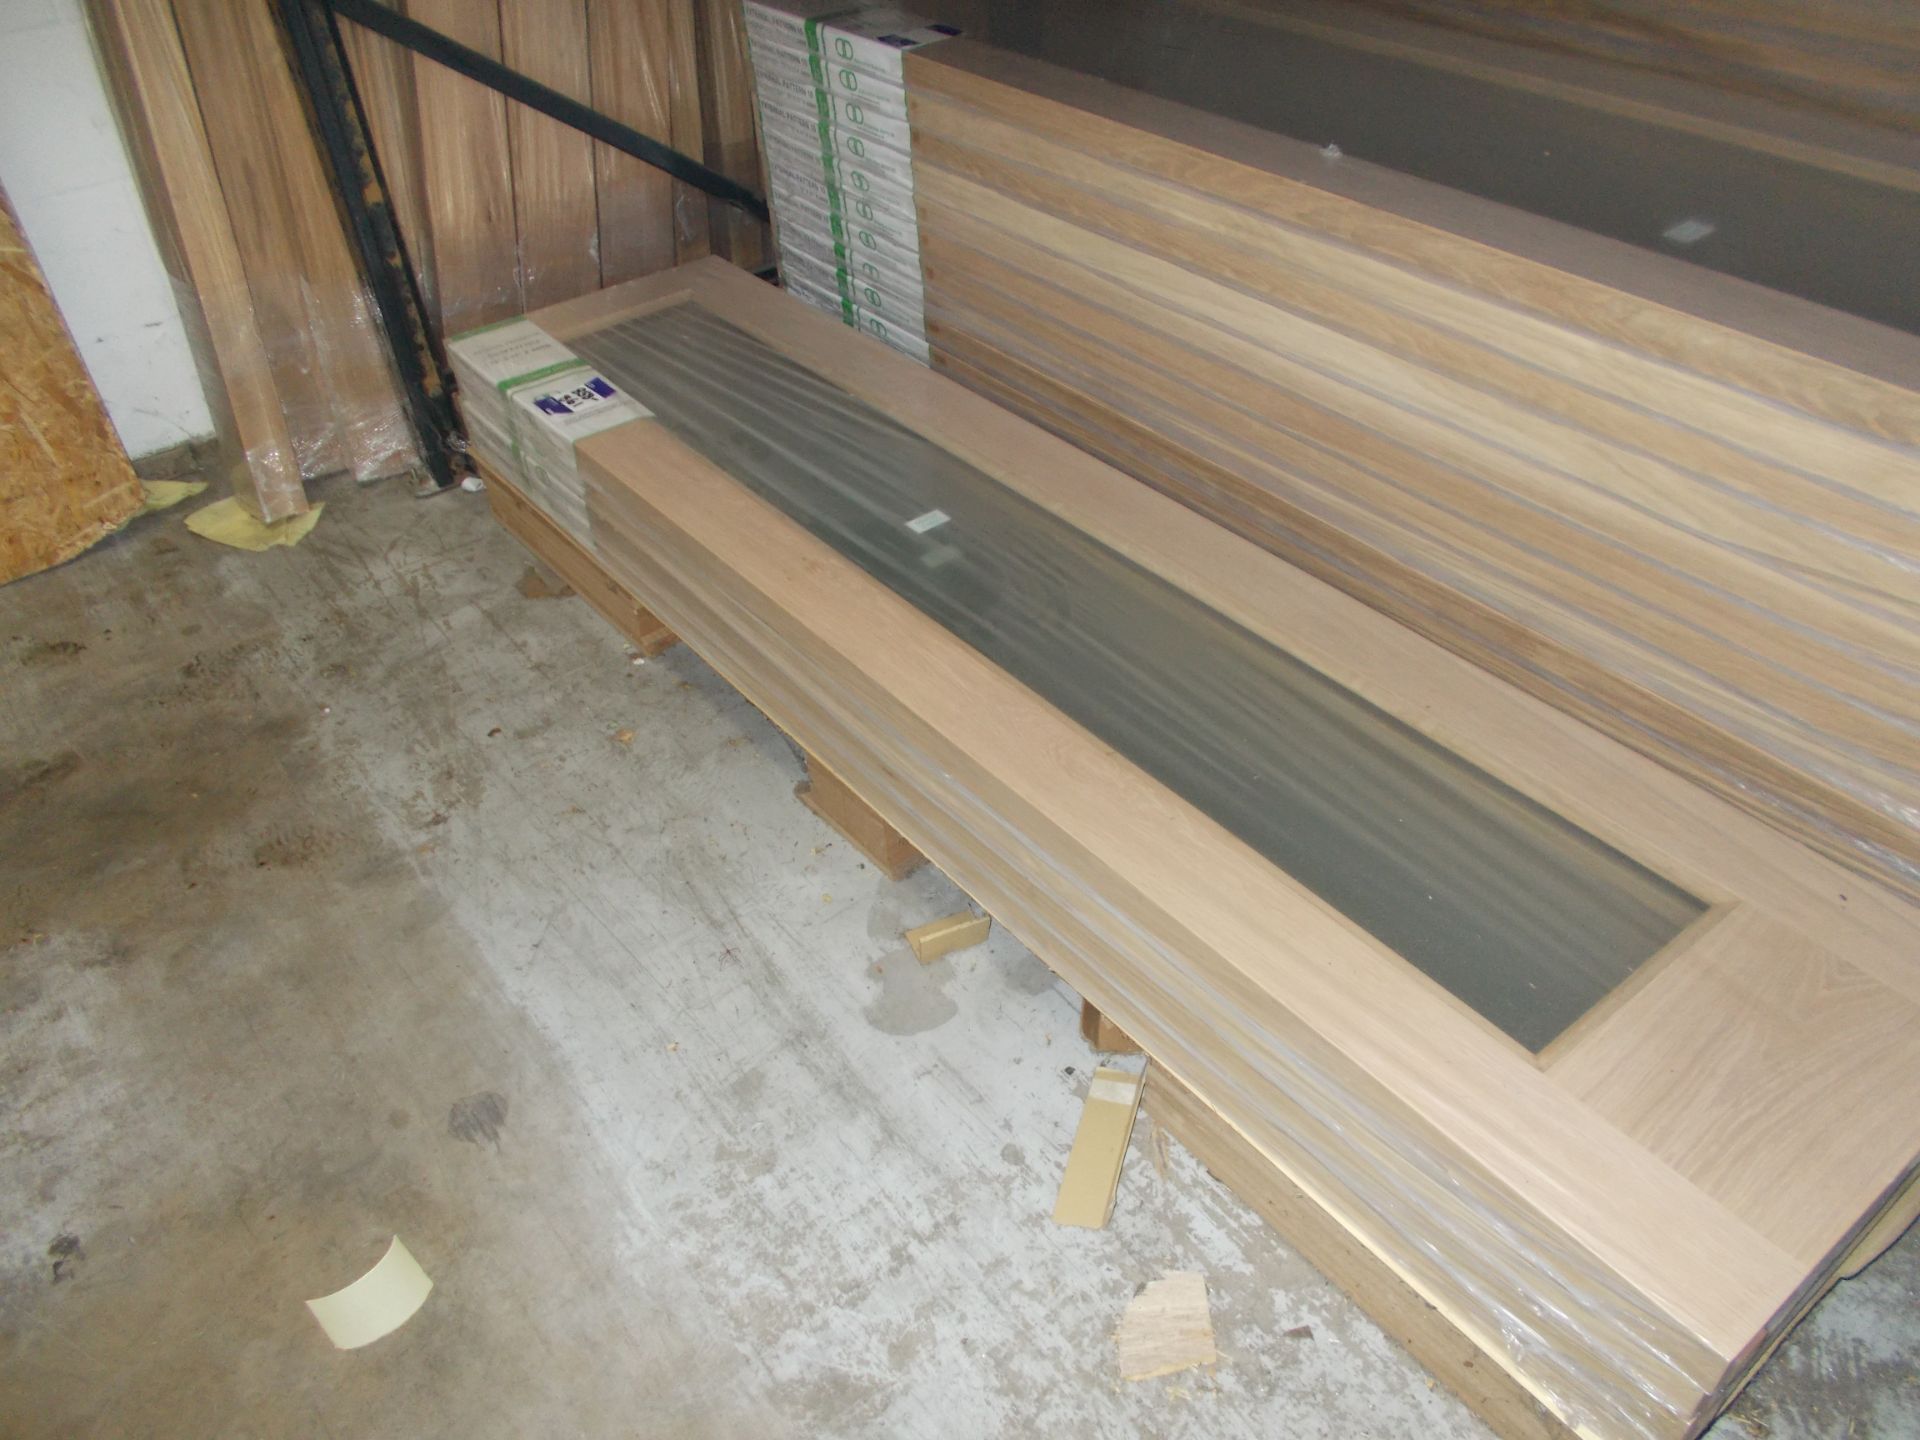 External Pattern10 DGOPATT1018 78”x18”x44mm External Fire Door - Lots to be handed out in order they